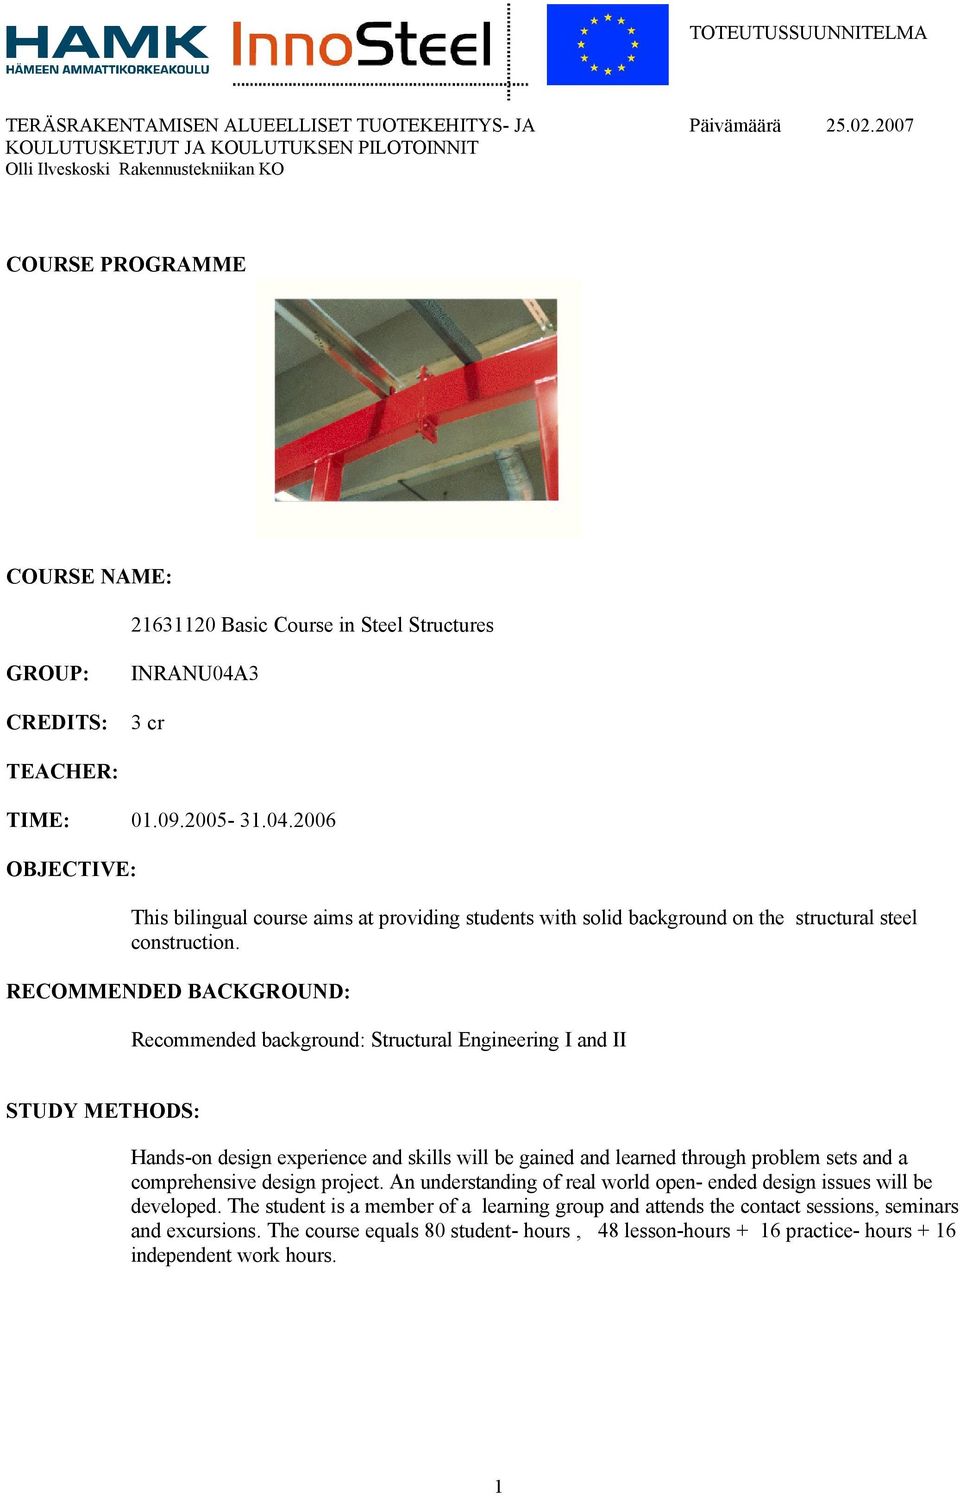 RECOMMENDED BACKGROUND: Recommended background: Structural Engineering I and II STUDY METHODS: Hands-on design experience and skills will be gained and learned through problem sets and a